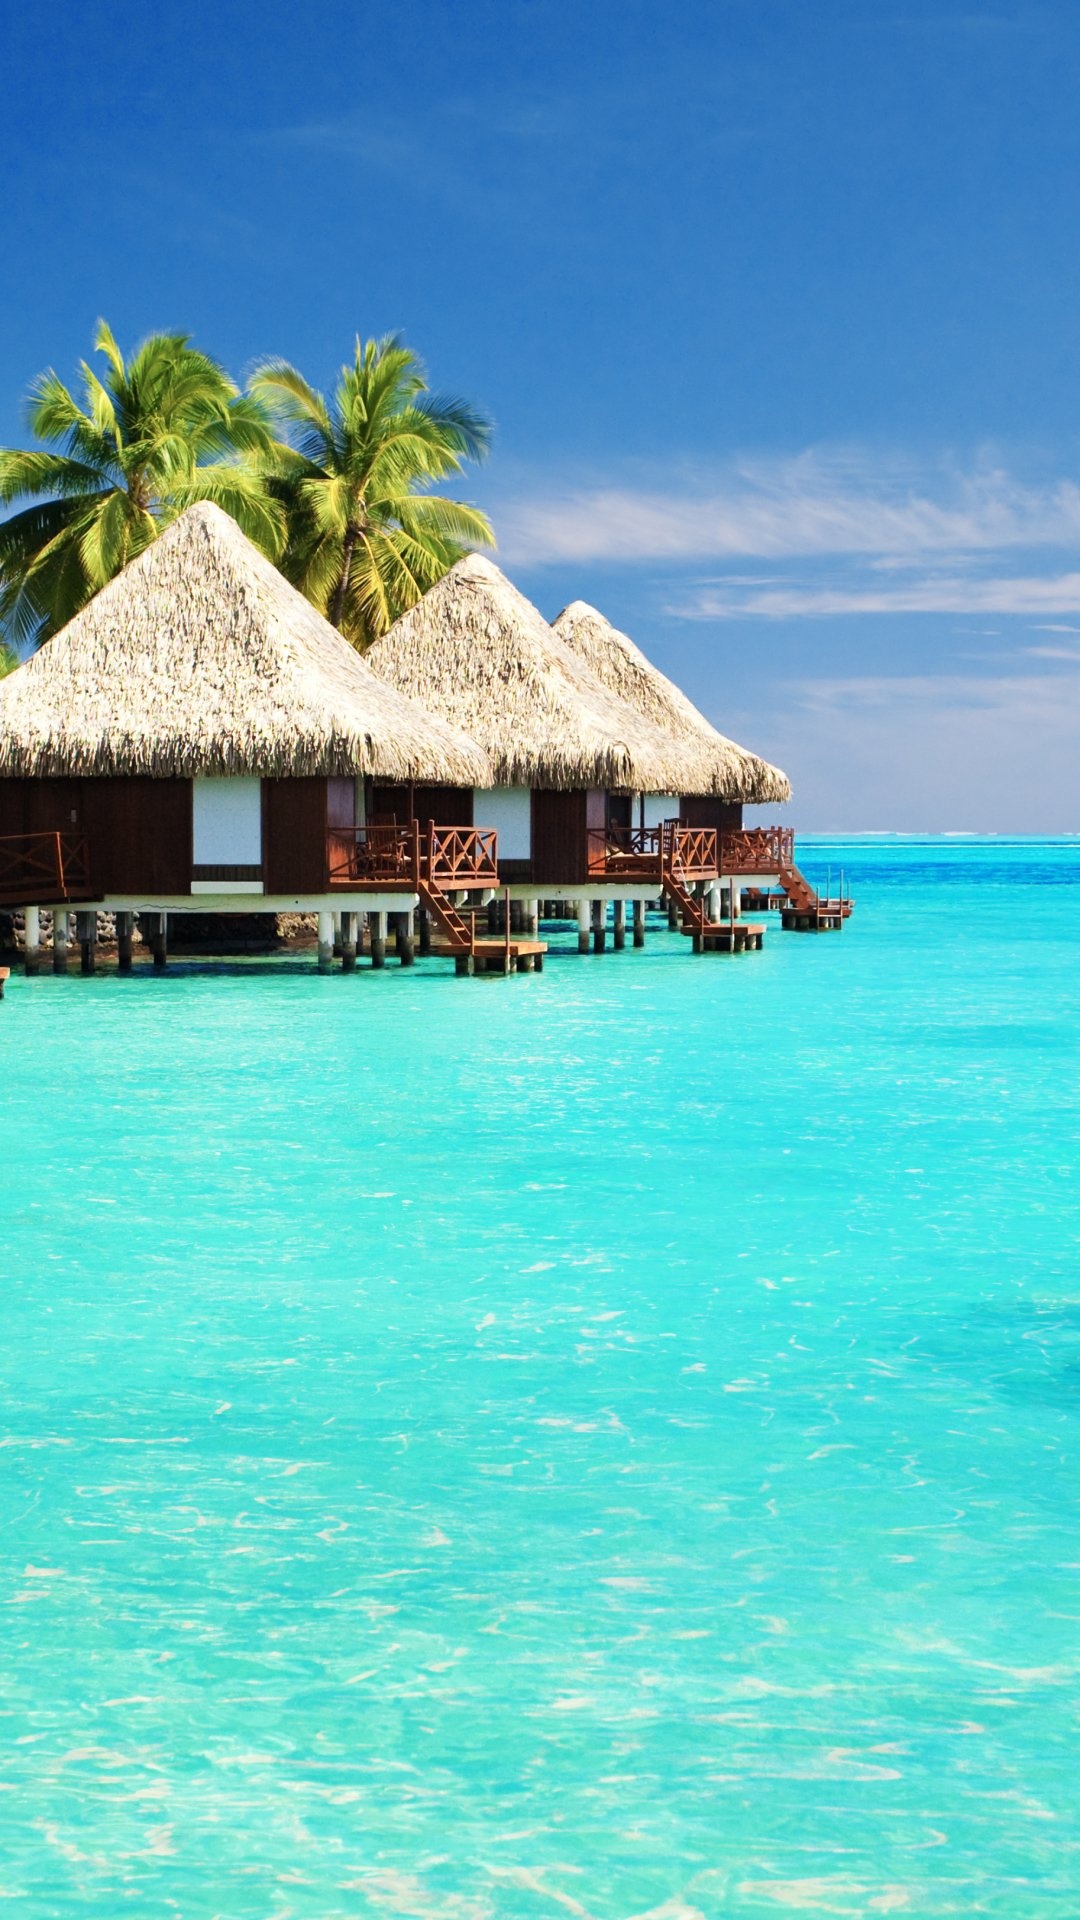 Bungalow: Small man-made tropical houses standing over the blue oceanic water. 1080x1920 Full HD Wallpaper.